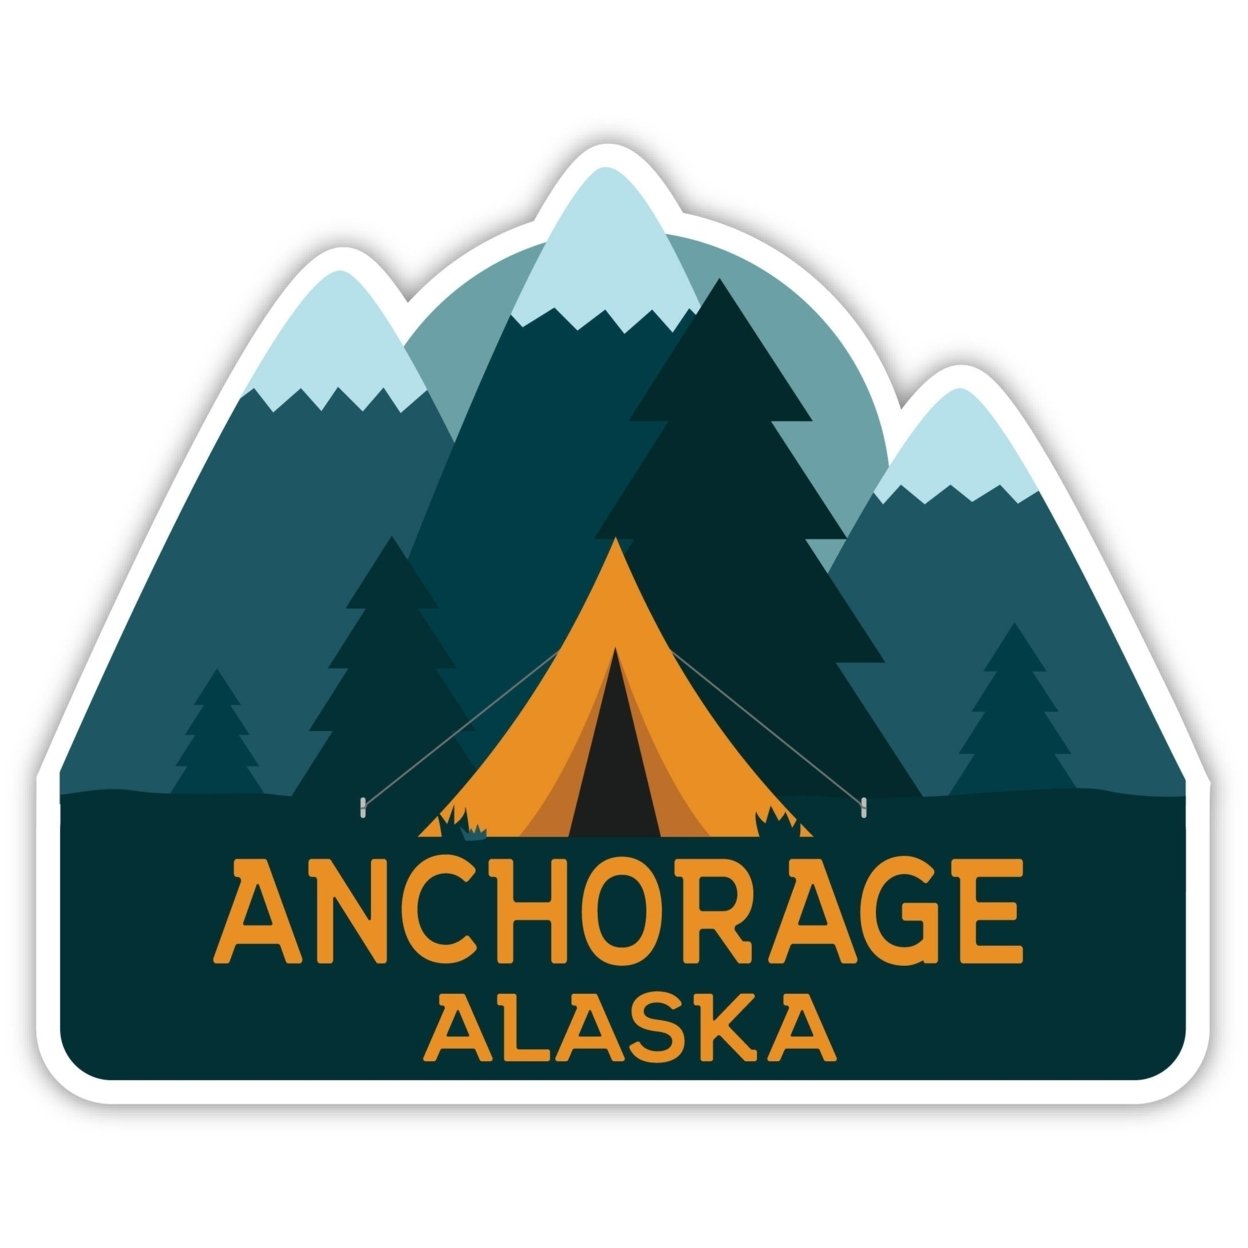 Anchorage Alaska Souvenir Decorative Stickers (Choose Theme And Size) - 4-Pack, 2-Inch, Tent